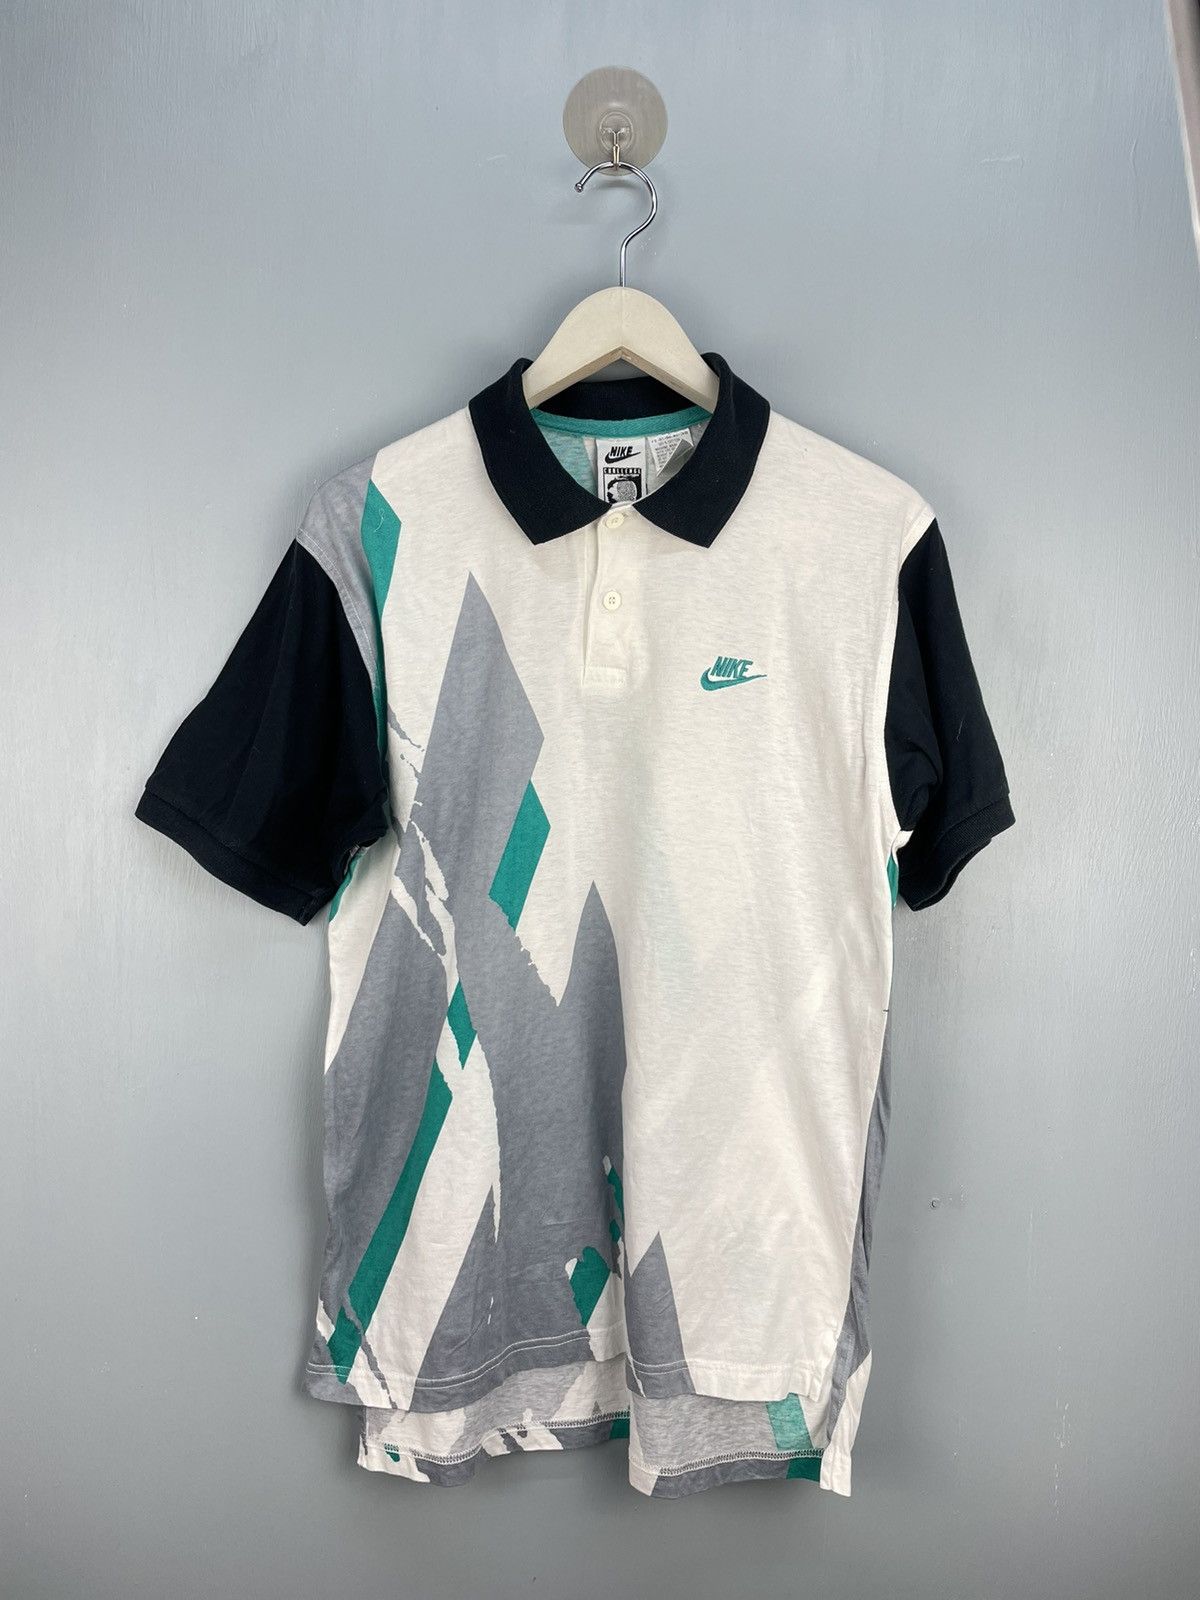 Nike Vintage 90s Nike Challenge court Andre Agassi tennis polo